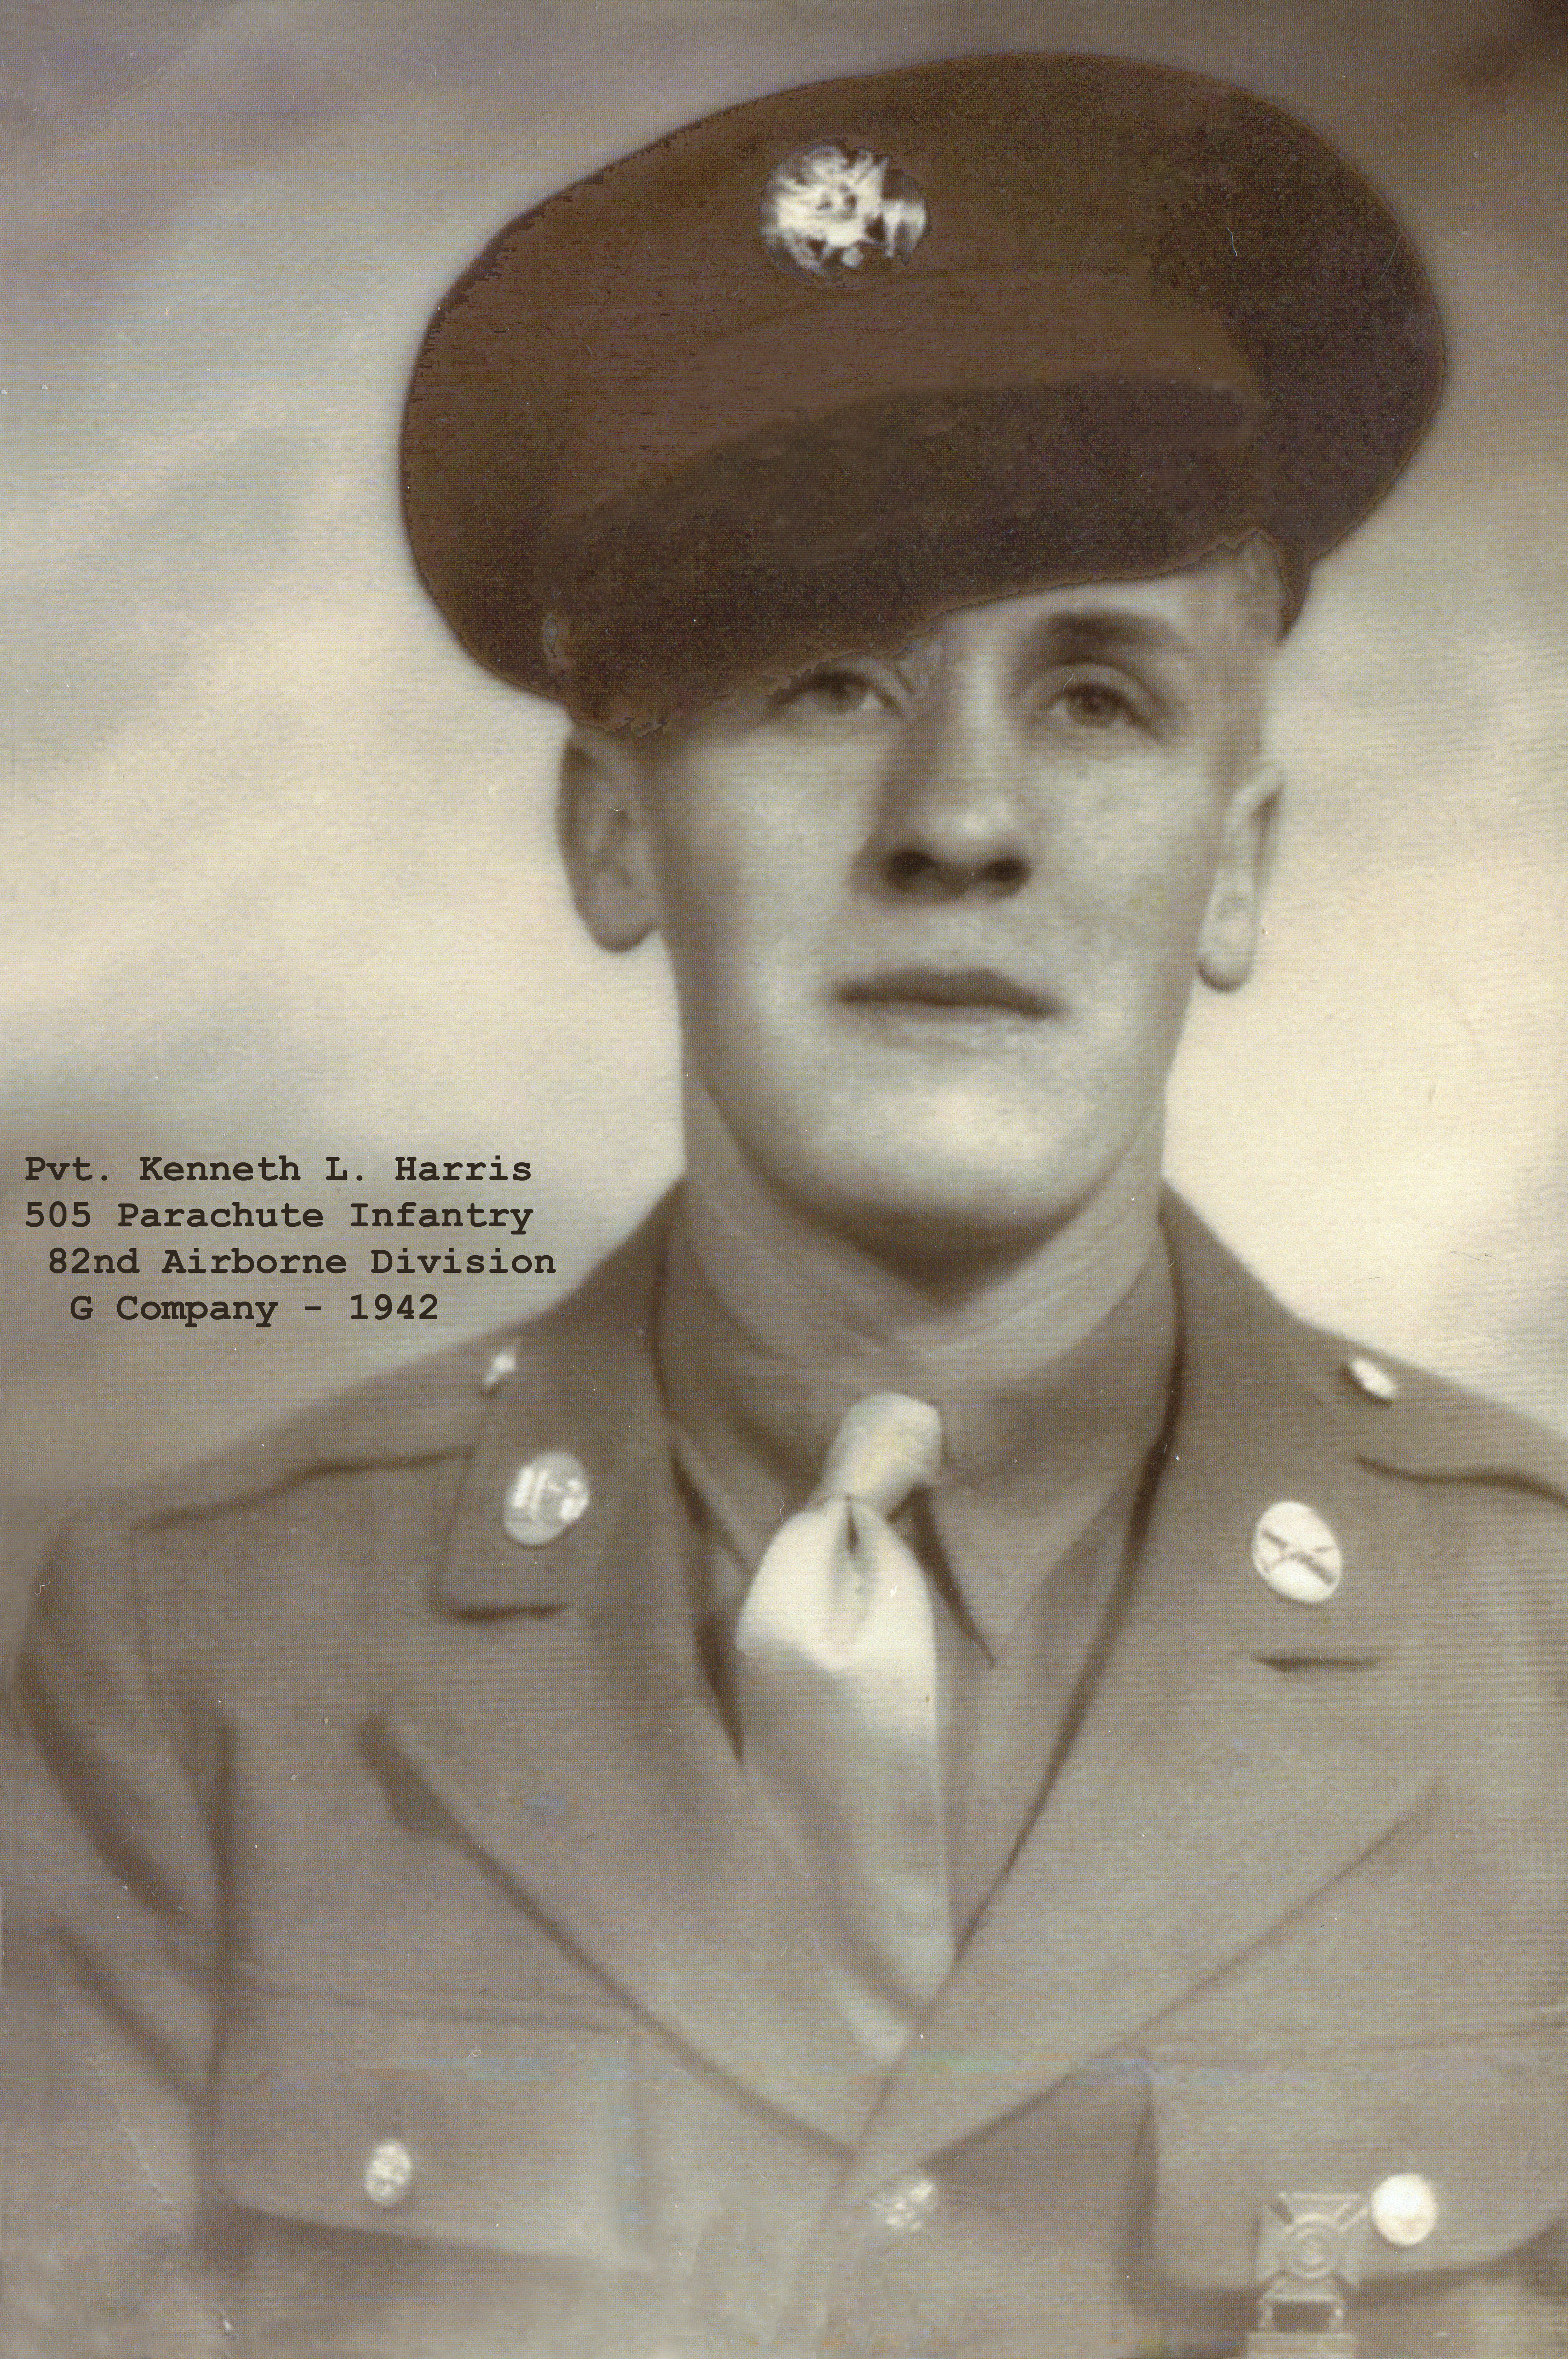 Pvt. Kenneth L. Harris - G Co. - 4 Combat Jumps - Silver Star medal